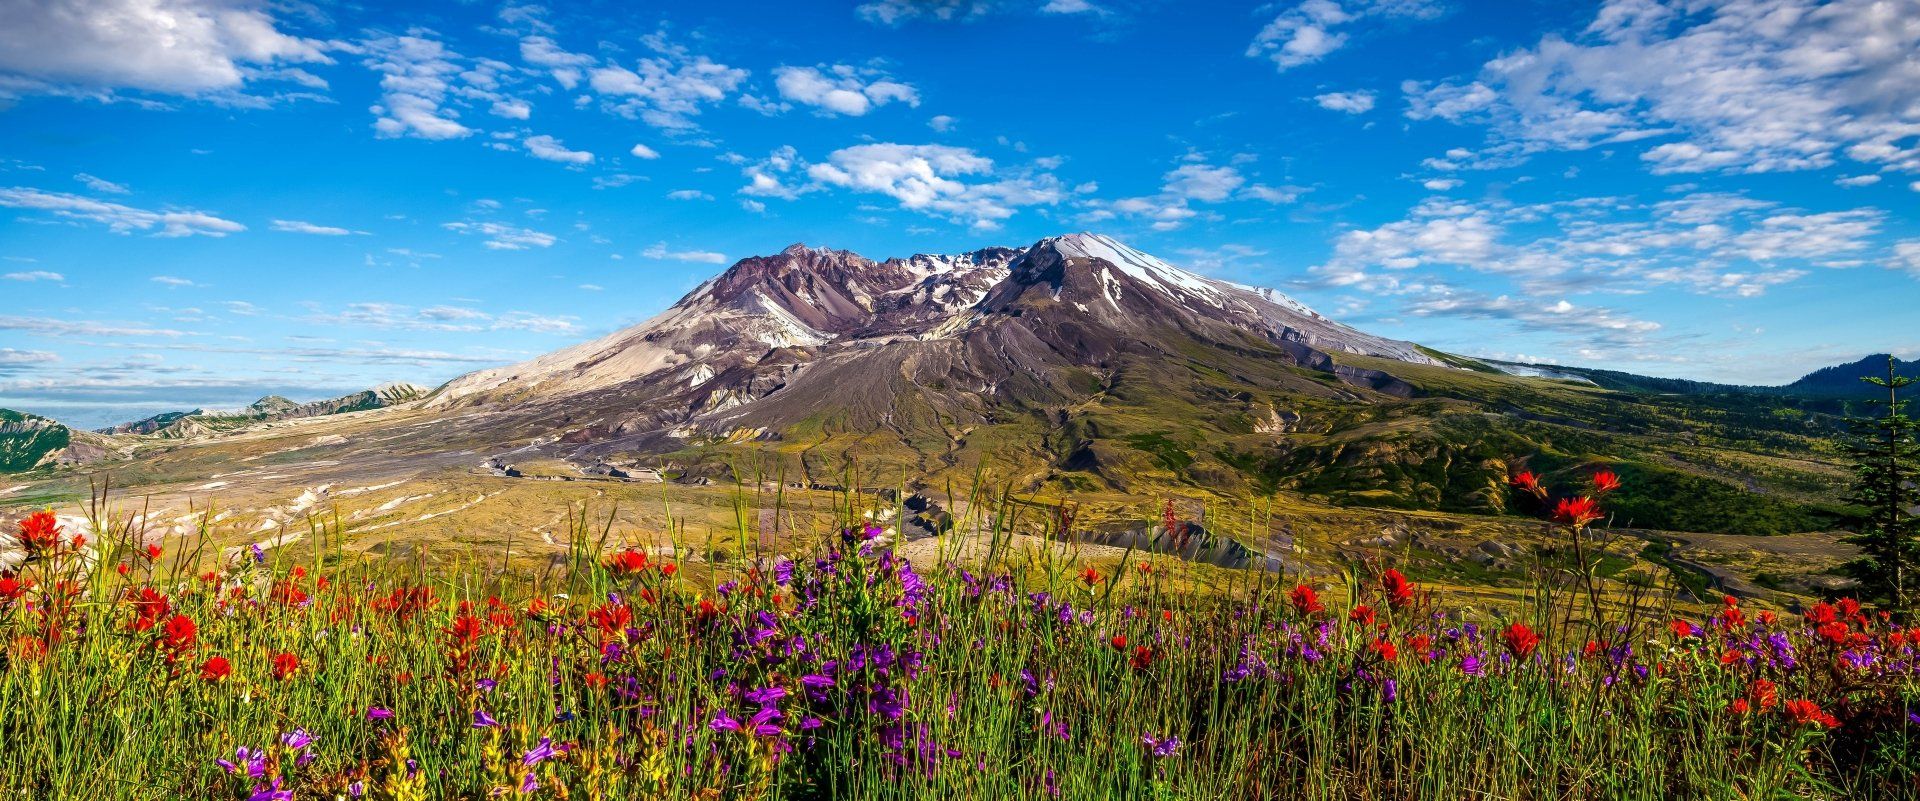 Mount St. Helens HD Wallpaper and Background Image